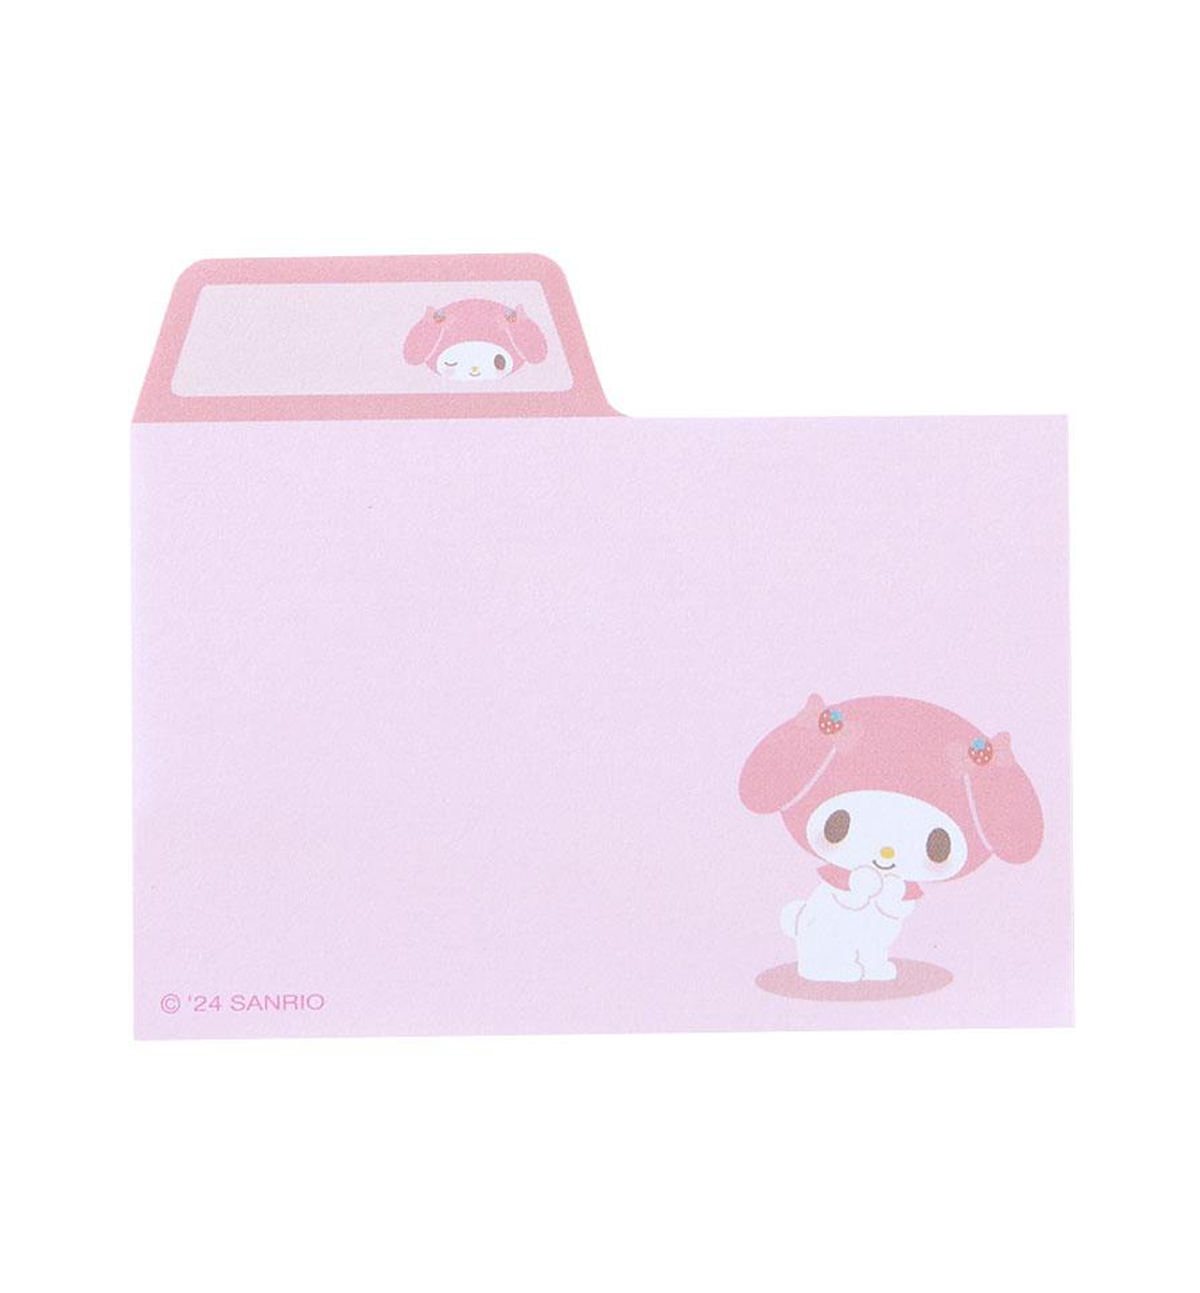 Sanrio Index Sticky Notes [My Melody]